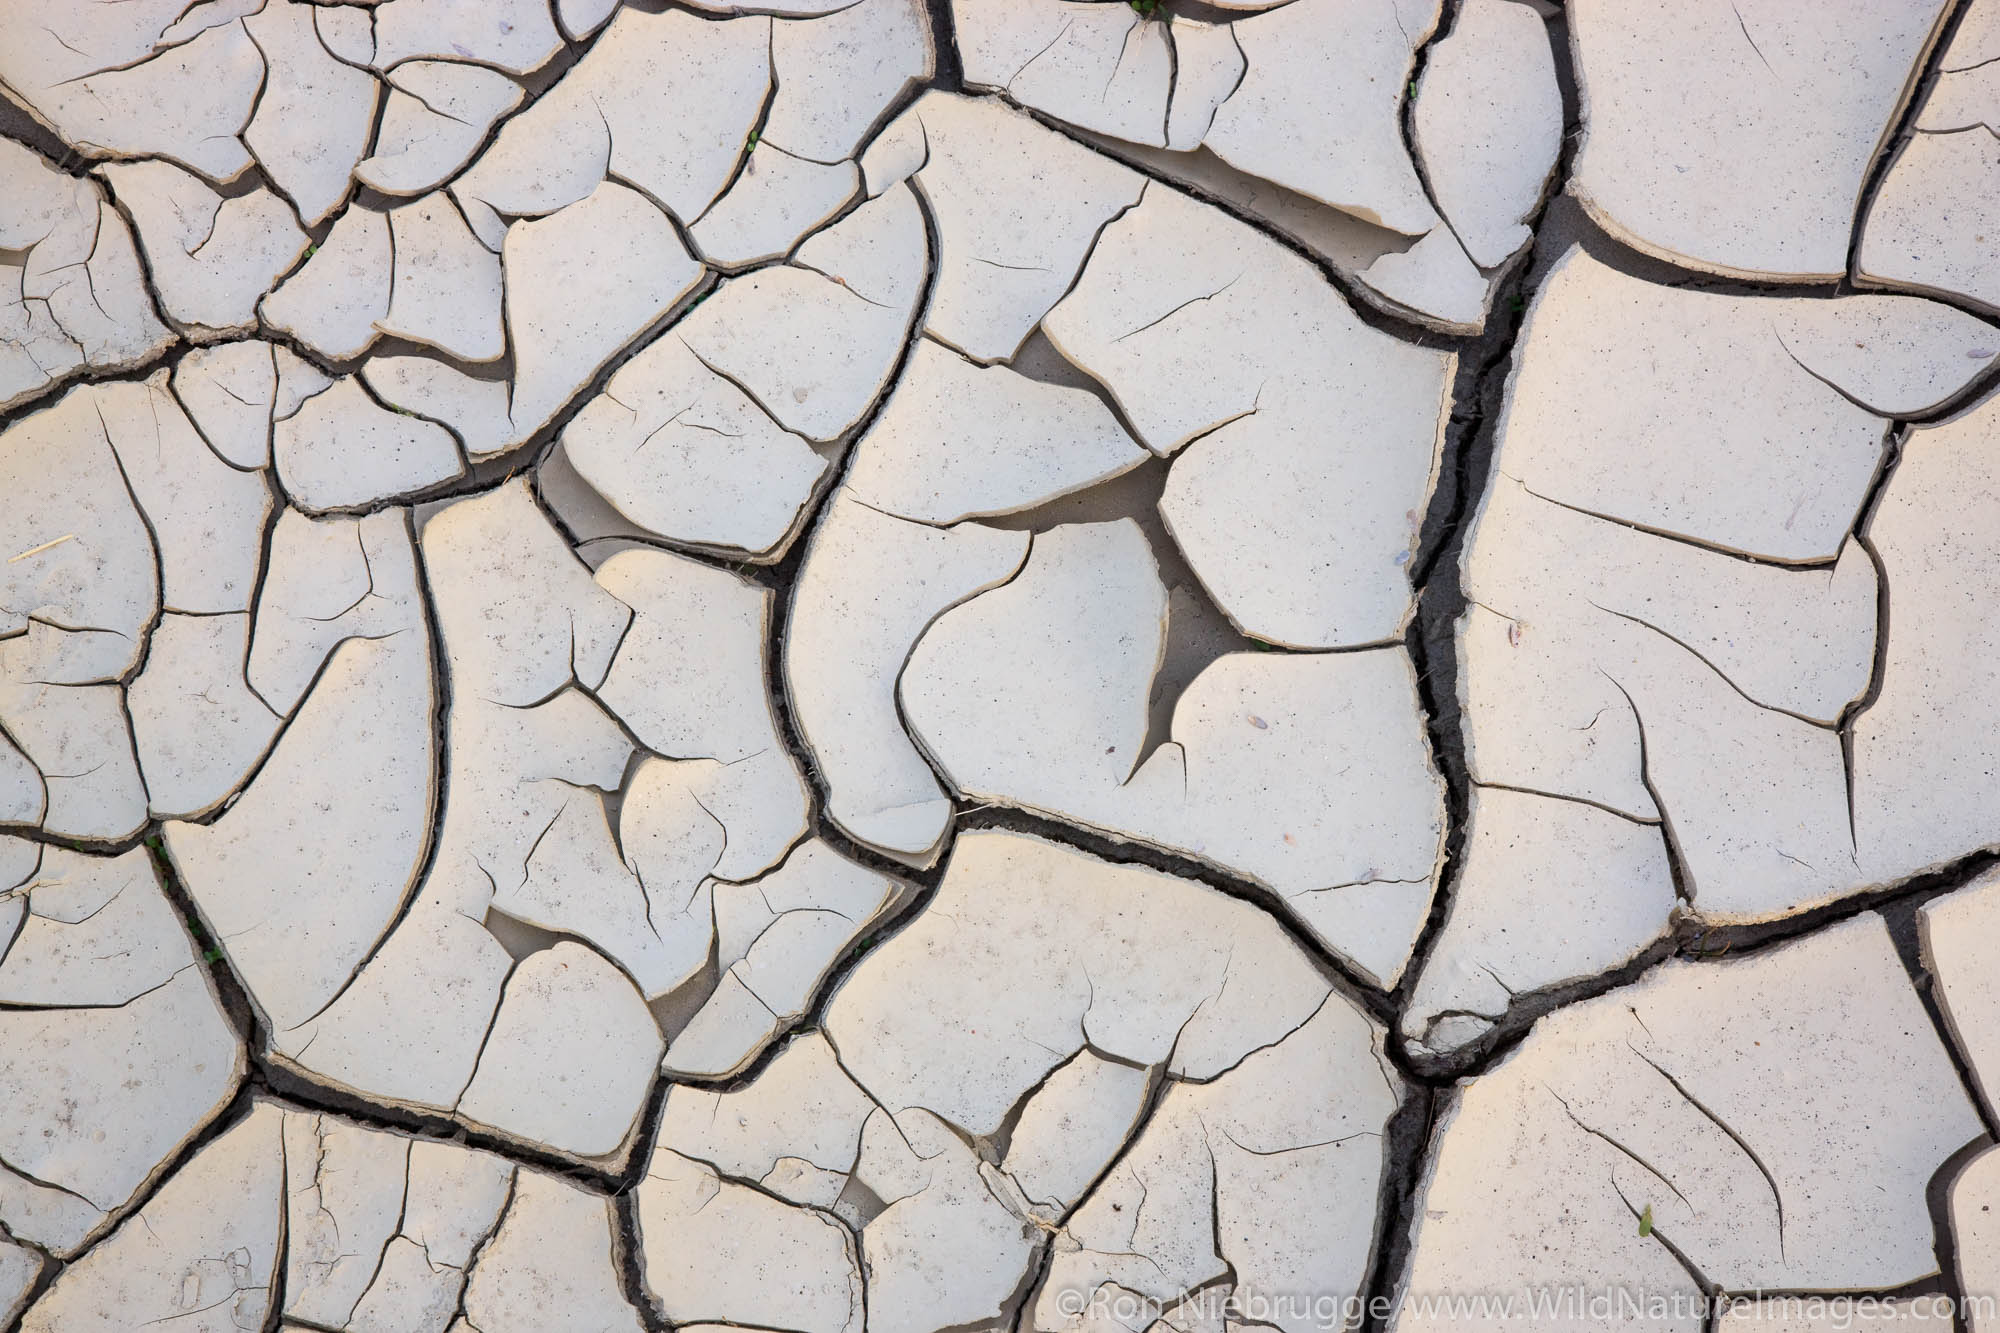 Dried cracked mud in a wash, Anza-Borrego Desert State Park, California.